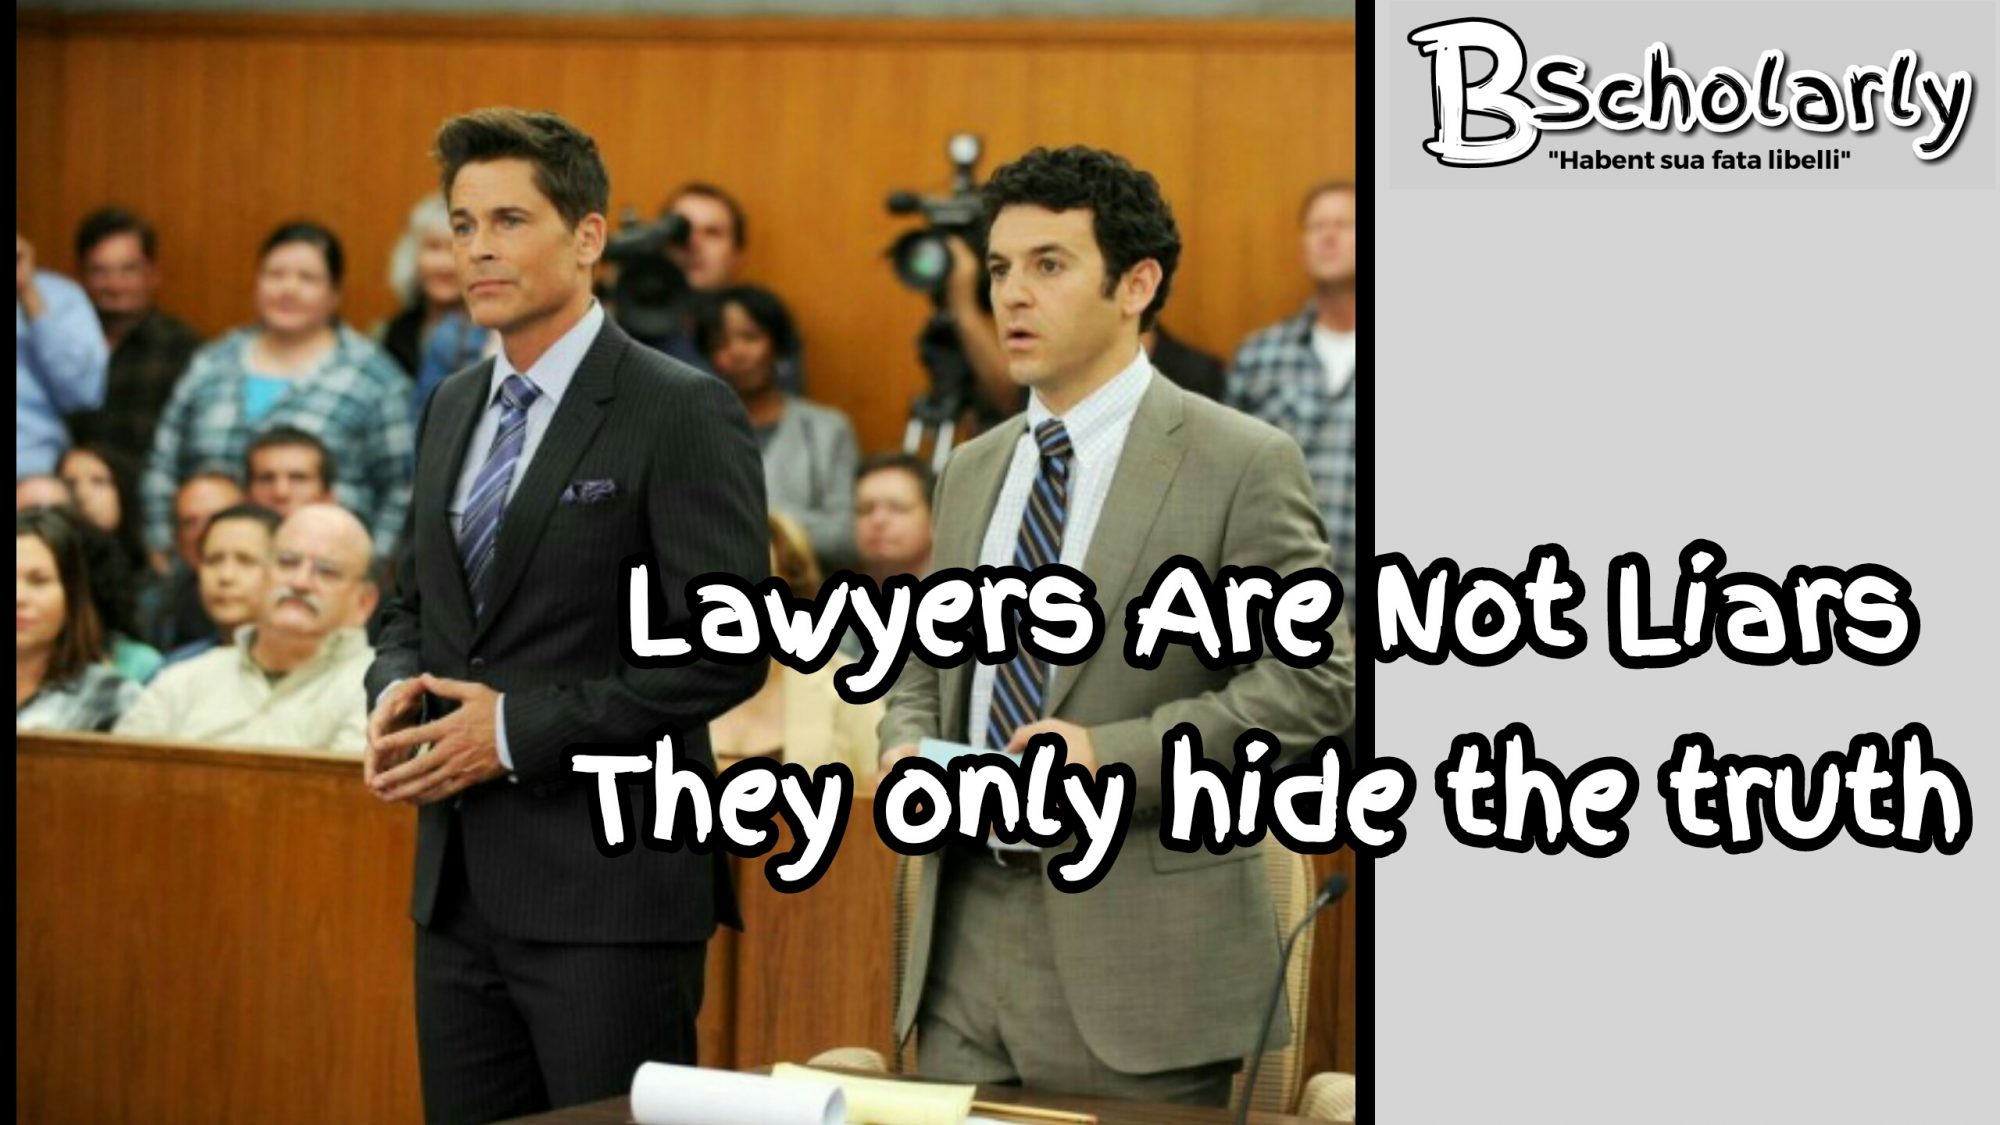 Are lawyers liars